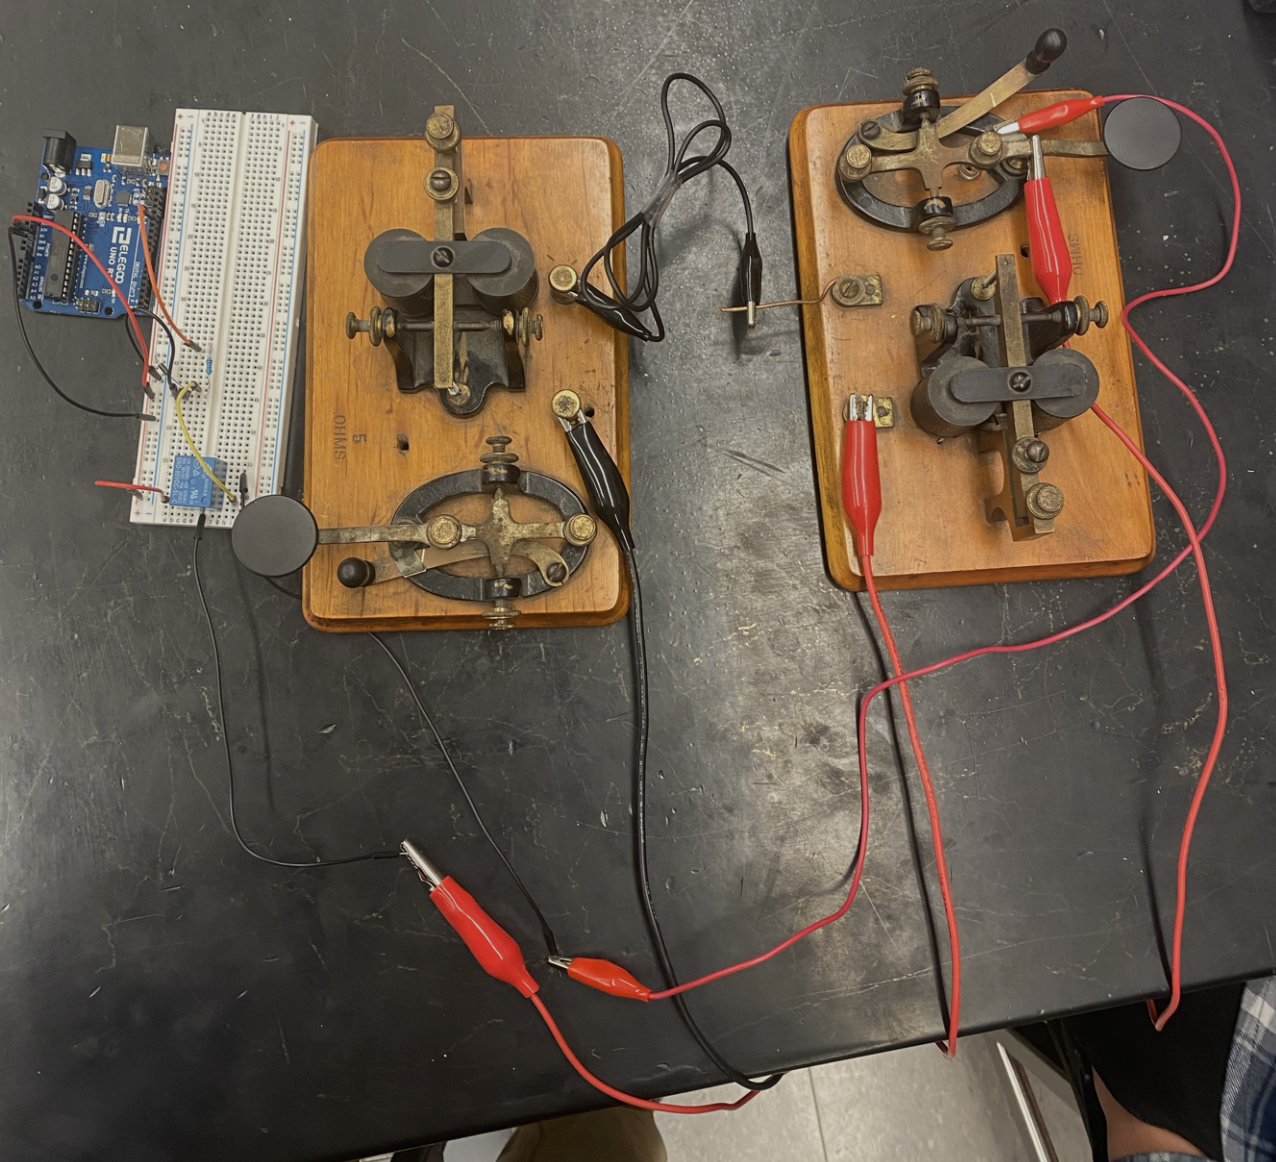 Arduino Controlled Telegraph, by George Theall, and Finn Snow